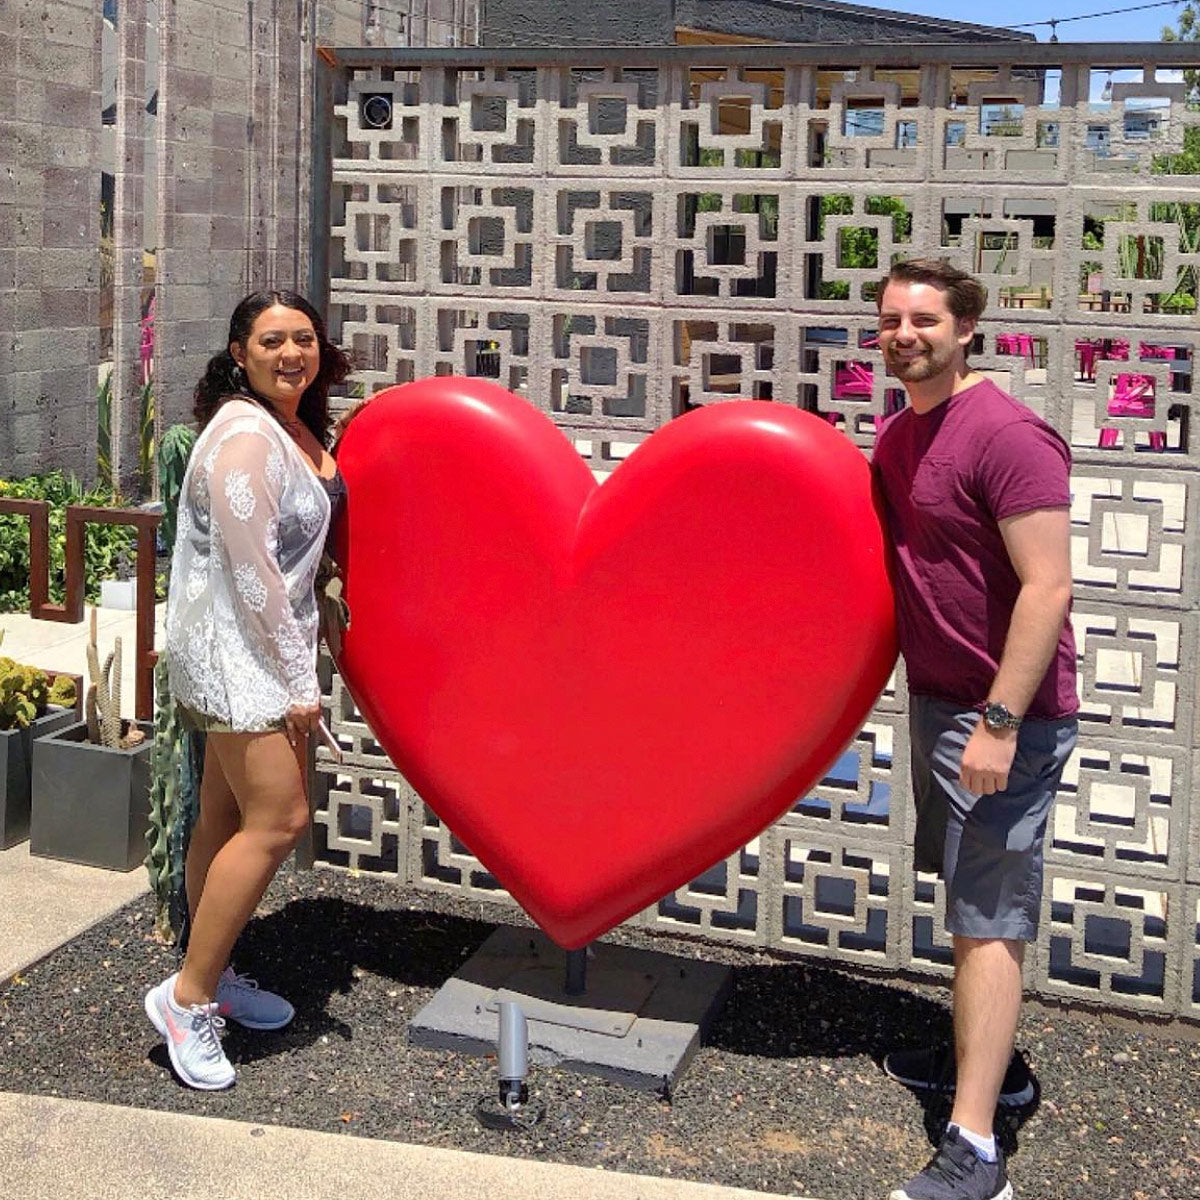 Two people standing next to a large red heart sculpture.